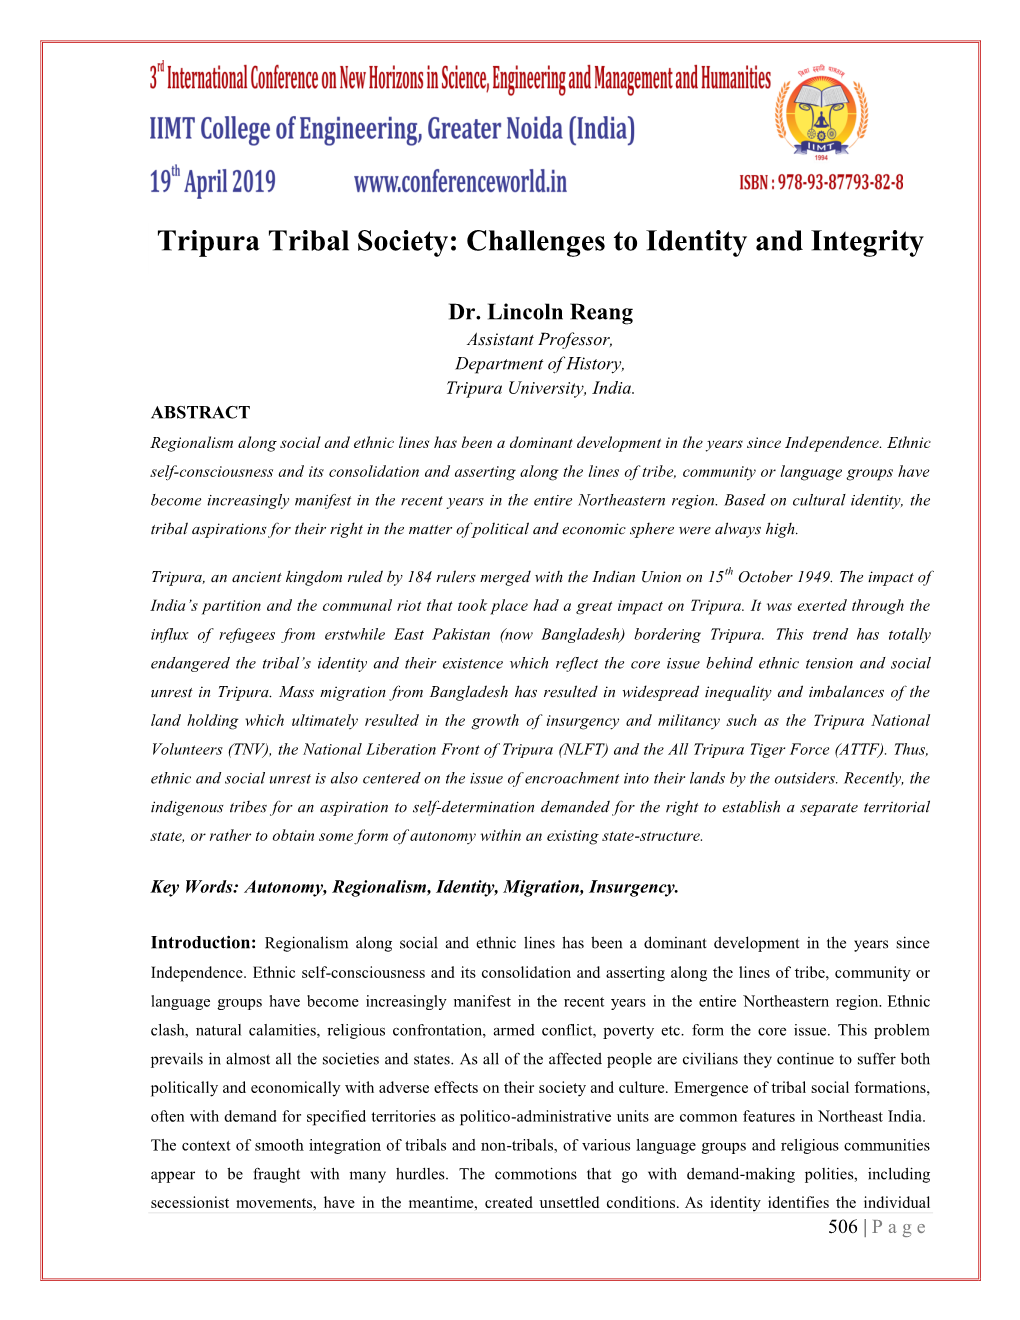 Tripura Tribal Society: Challenges to Identity and Integrity